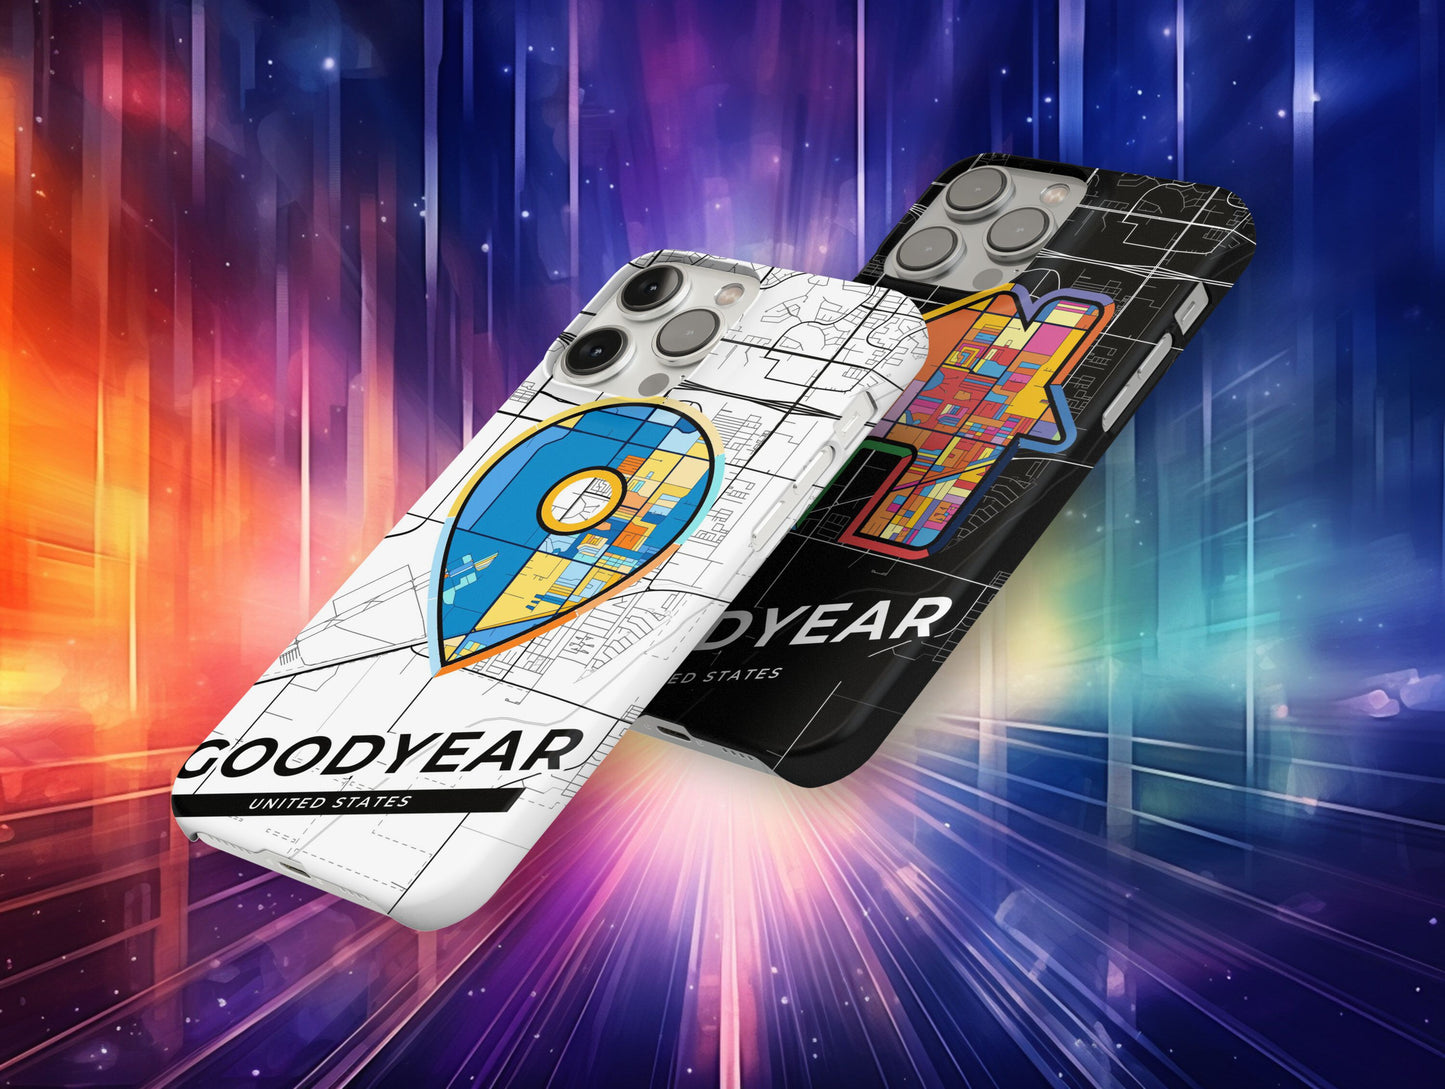 Goodyear Arizona slim phone case with colorful icon. Birthday, wedding or housewarming gift. Couple match cases.